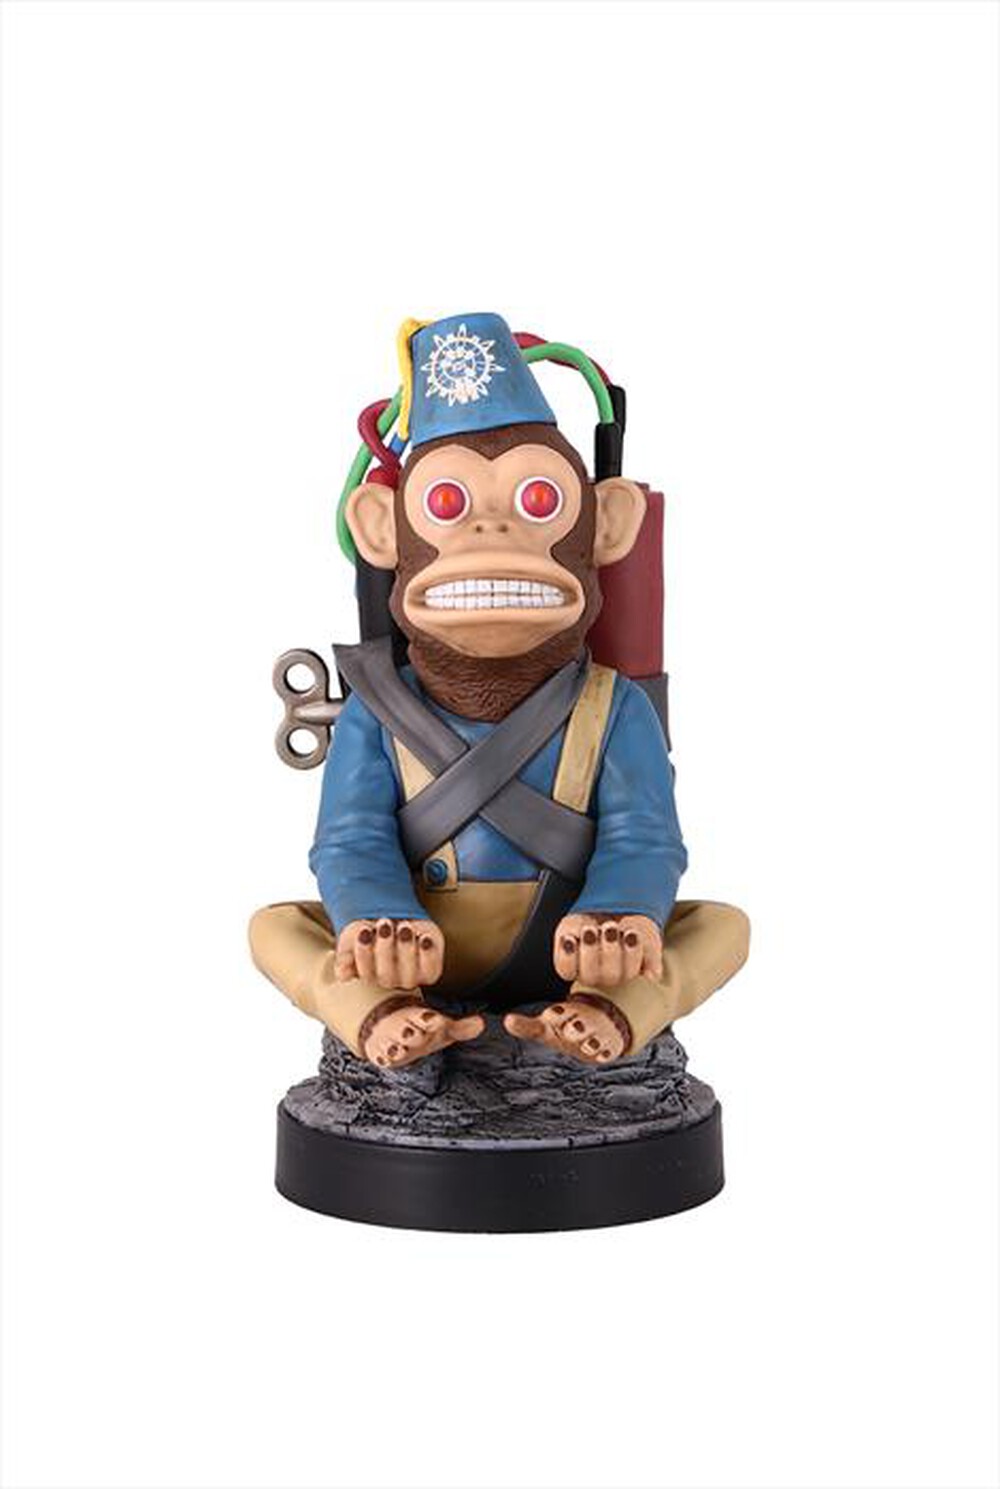 "EXQUISITE GAMING - MONKEY BOMB CABLE GUY"